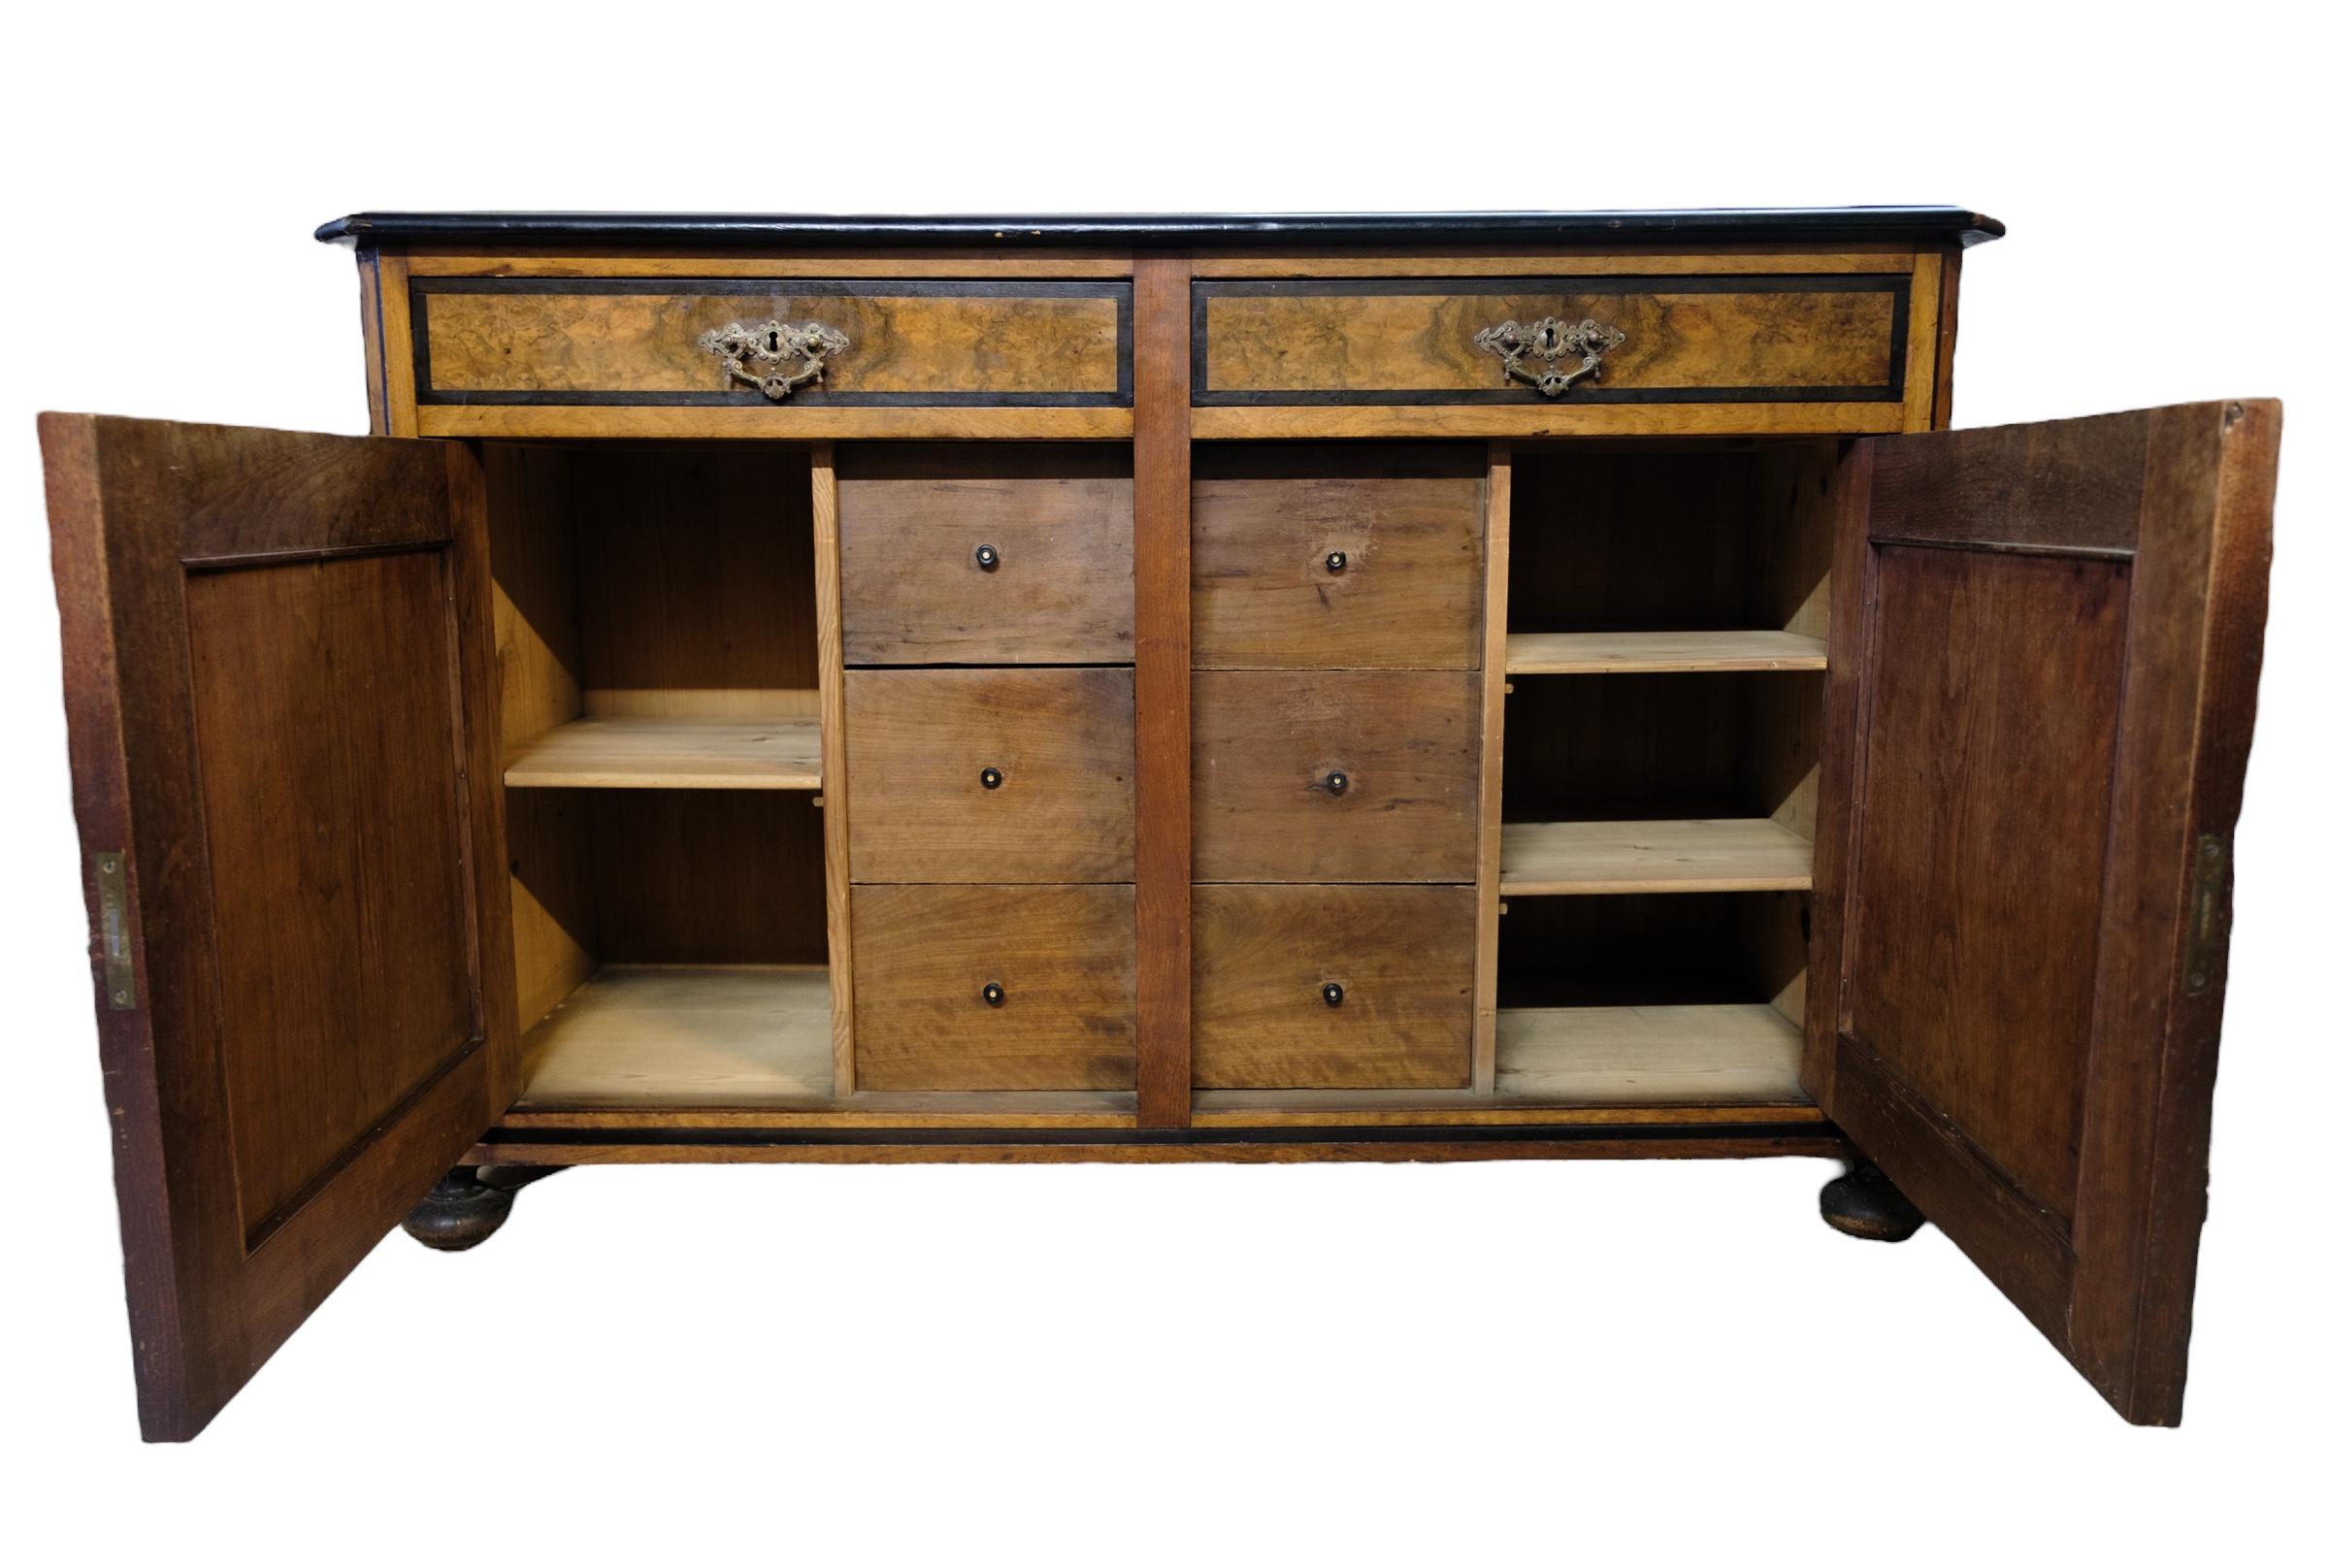 Light mahogany sideboard with 2 doors and 2 drawers and round legs from around the 1920s.
Measurements in cm: H:91 W:142 D:52